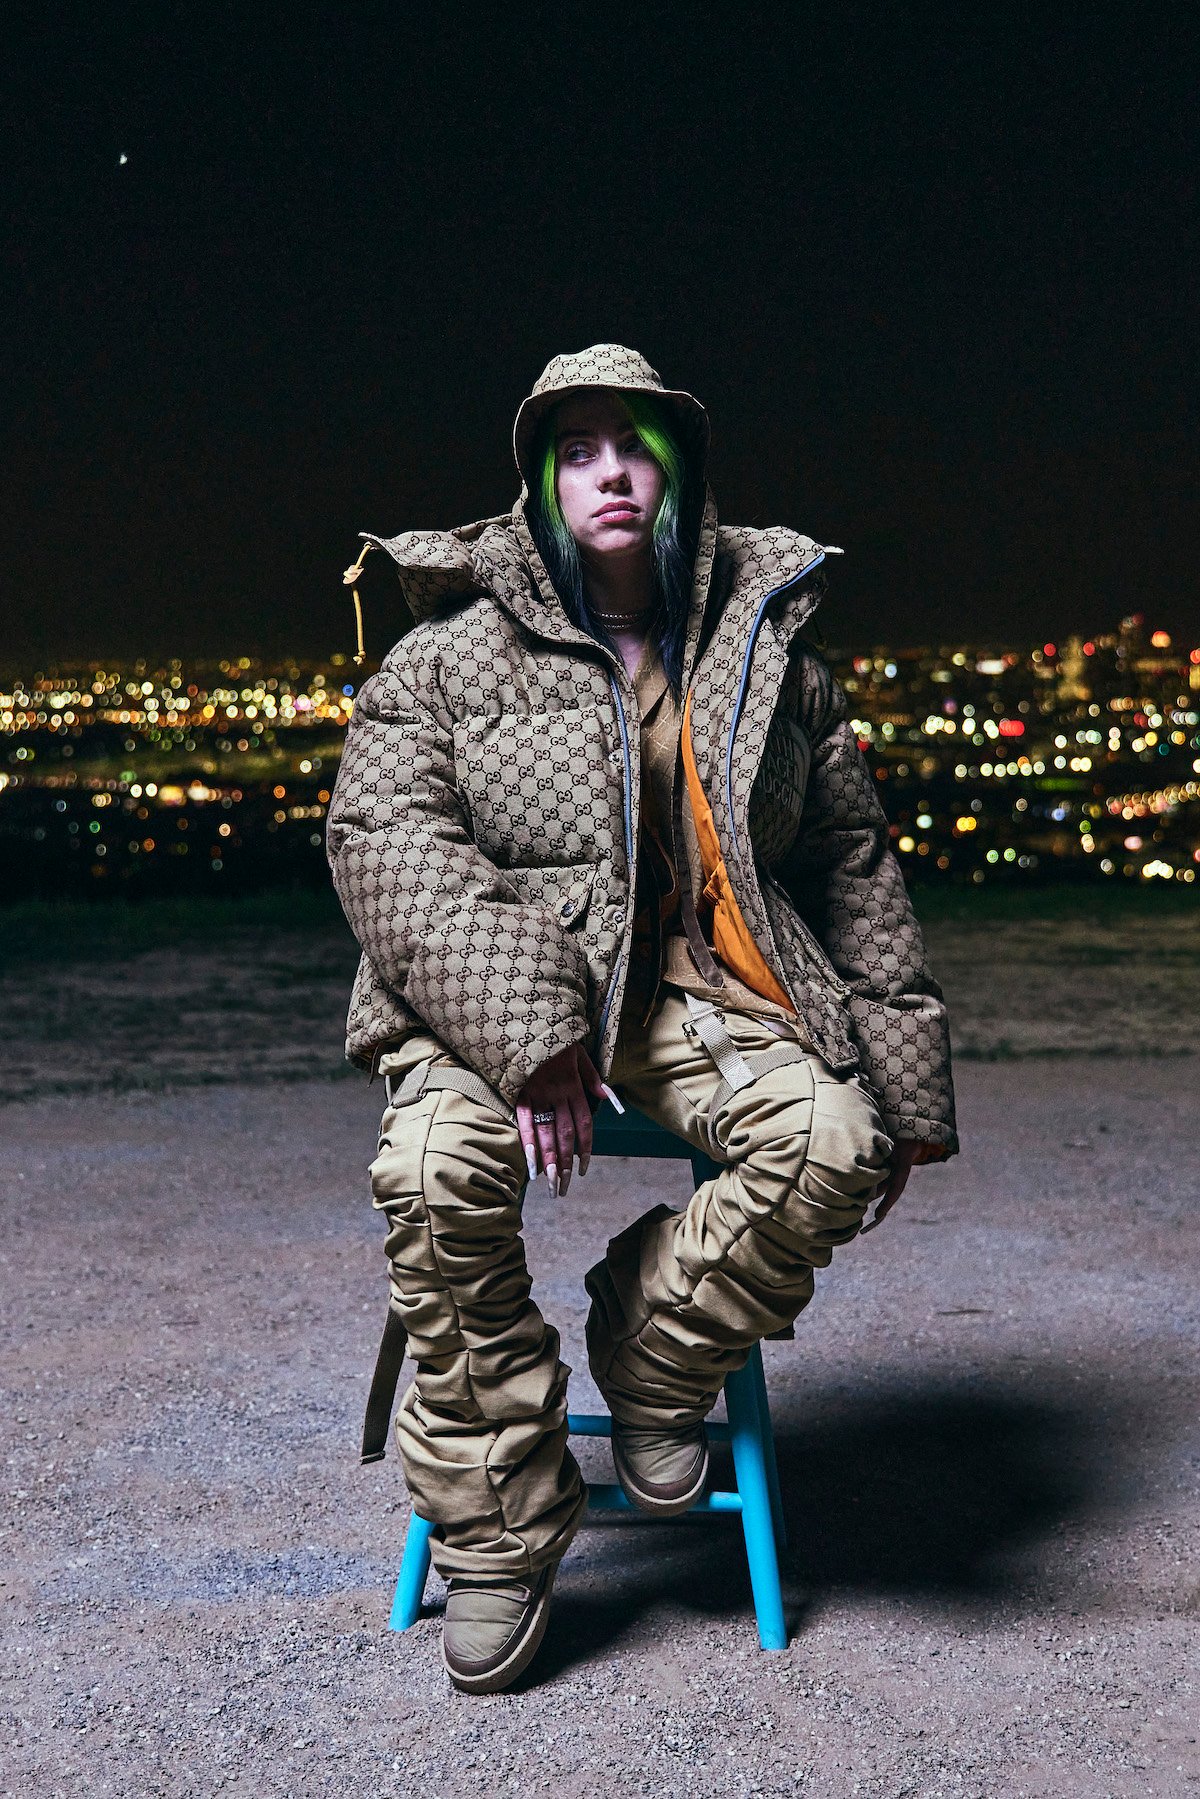 Billie Eilish alone in a chair facing the camera unsmiling, wearing an oversized puffy coat and baggy pants.